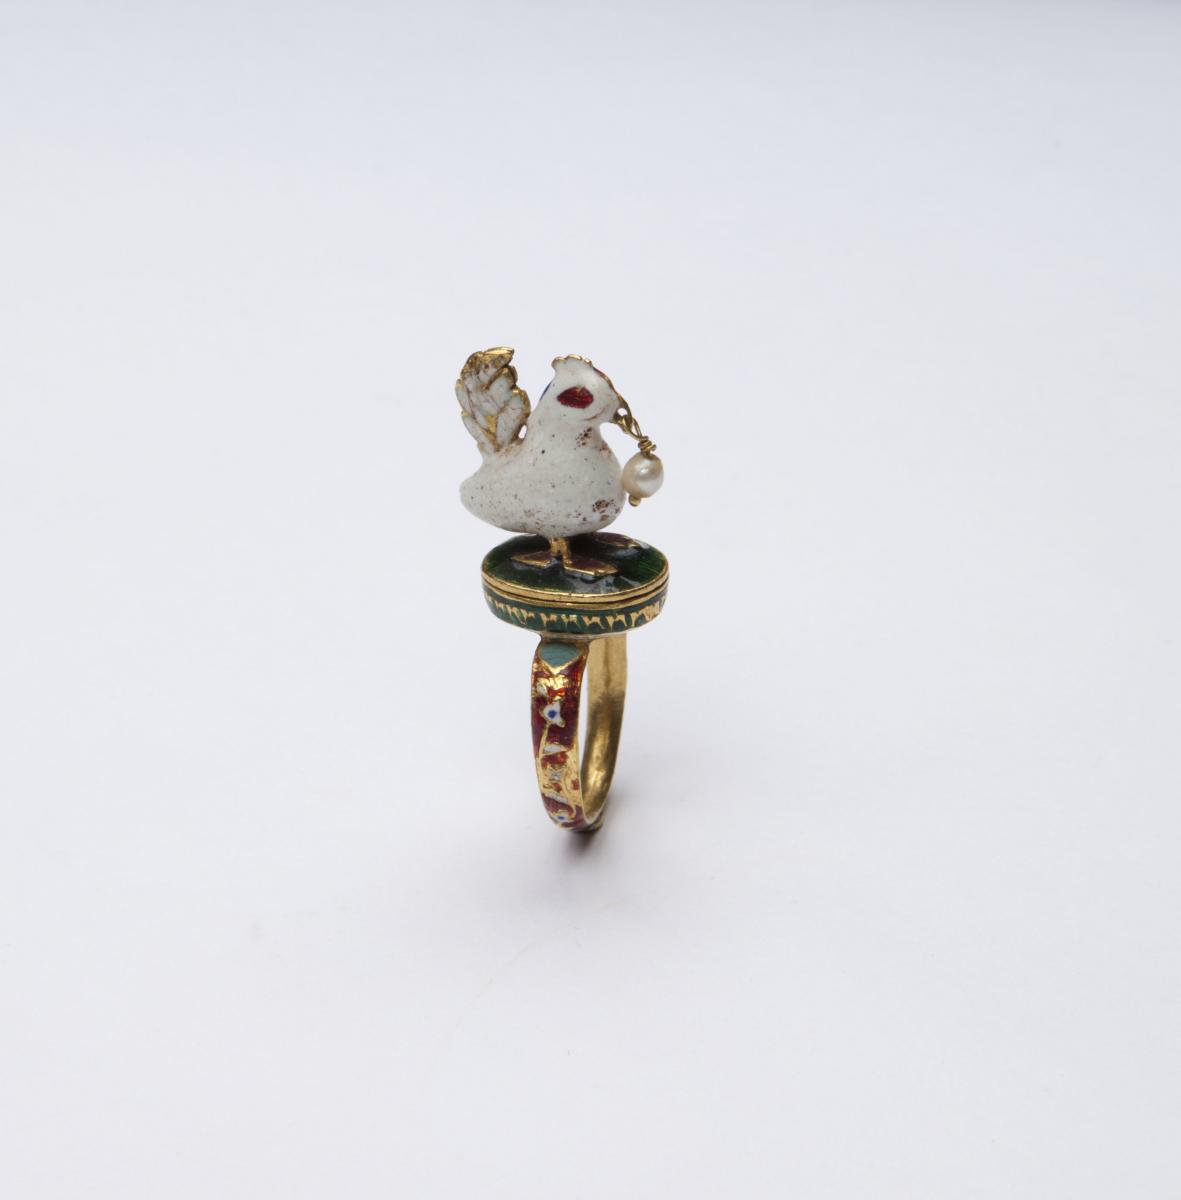 A Gold and Enamel Ring in the Form of a Rooster Mughal India 17 - 18th Century